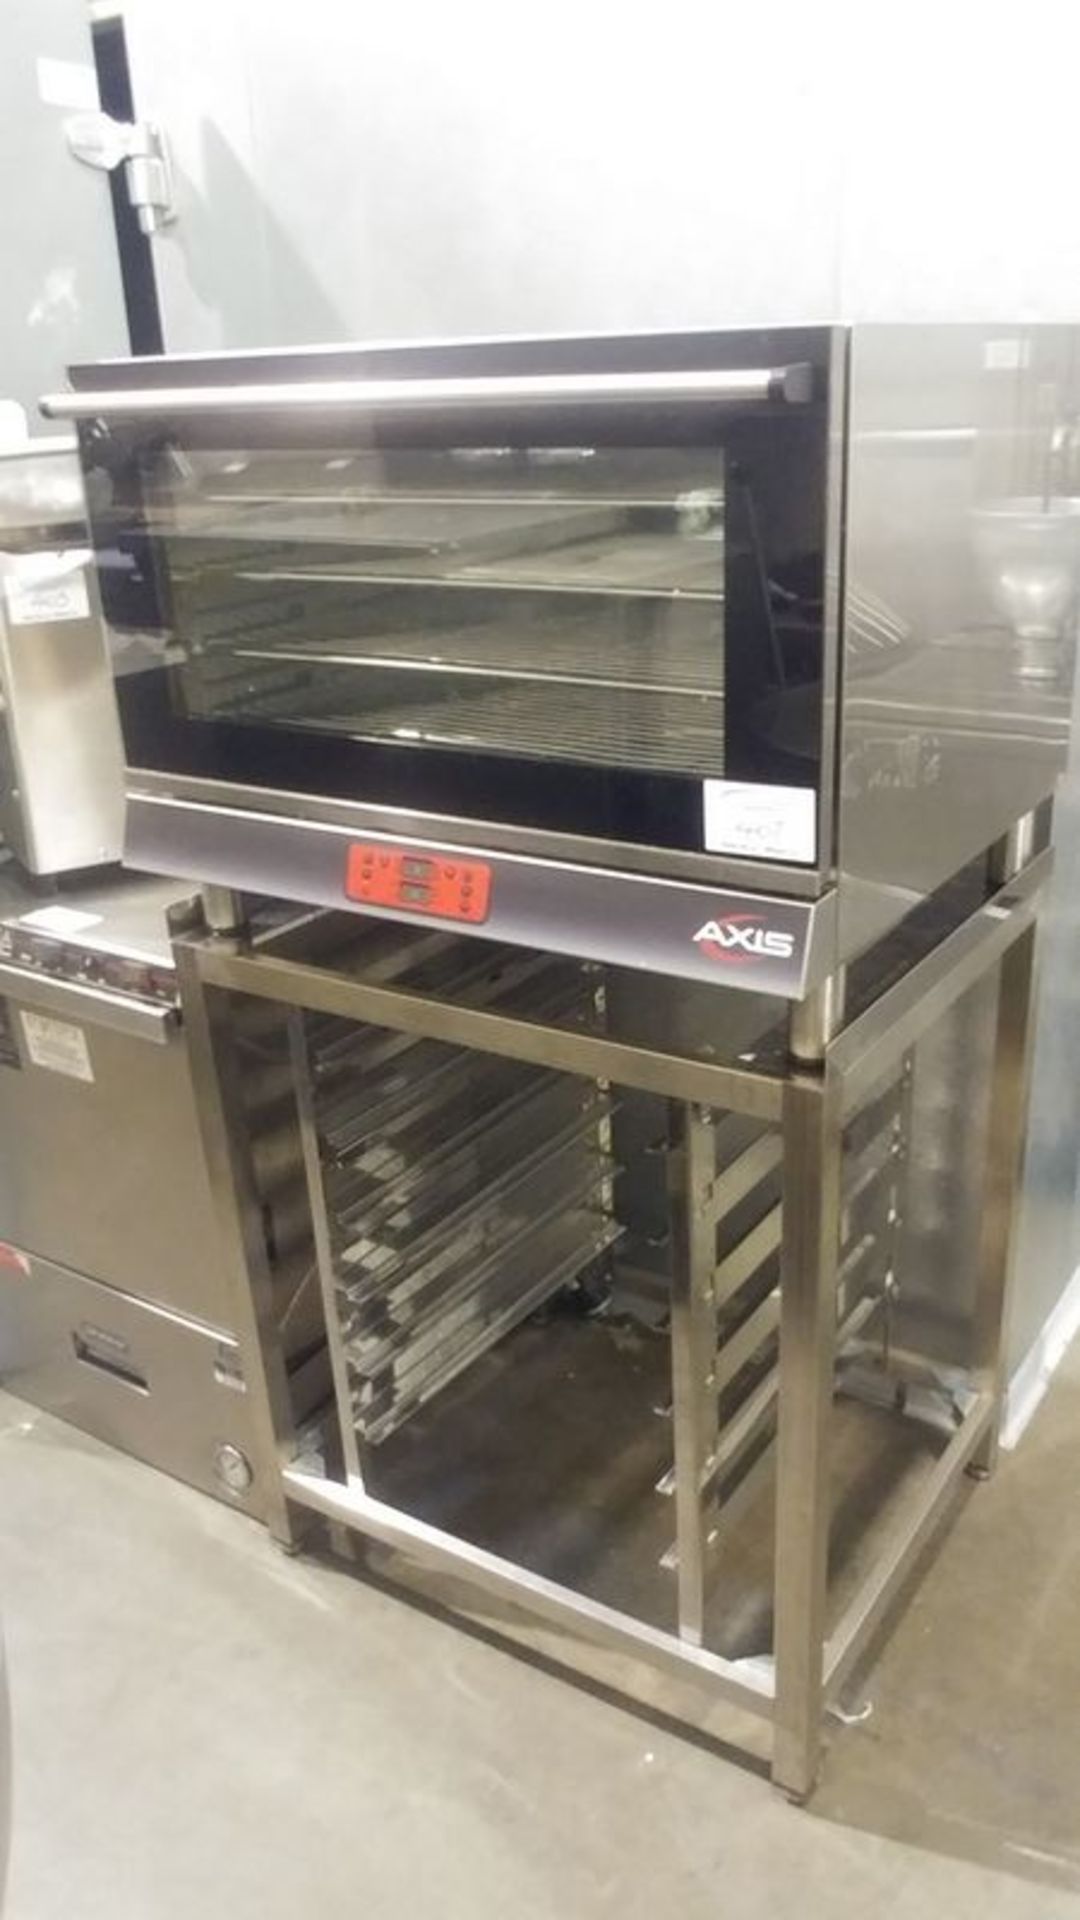 Axis Electric Convection Oven on Stand - Used 2 Months